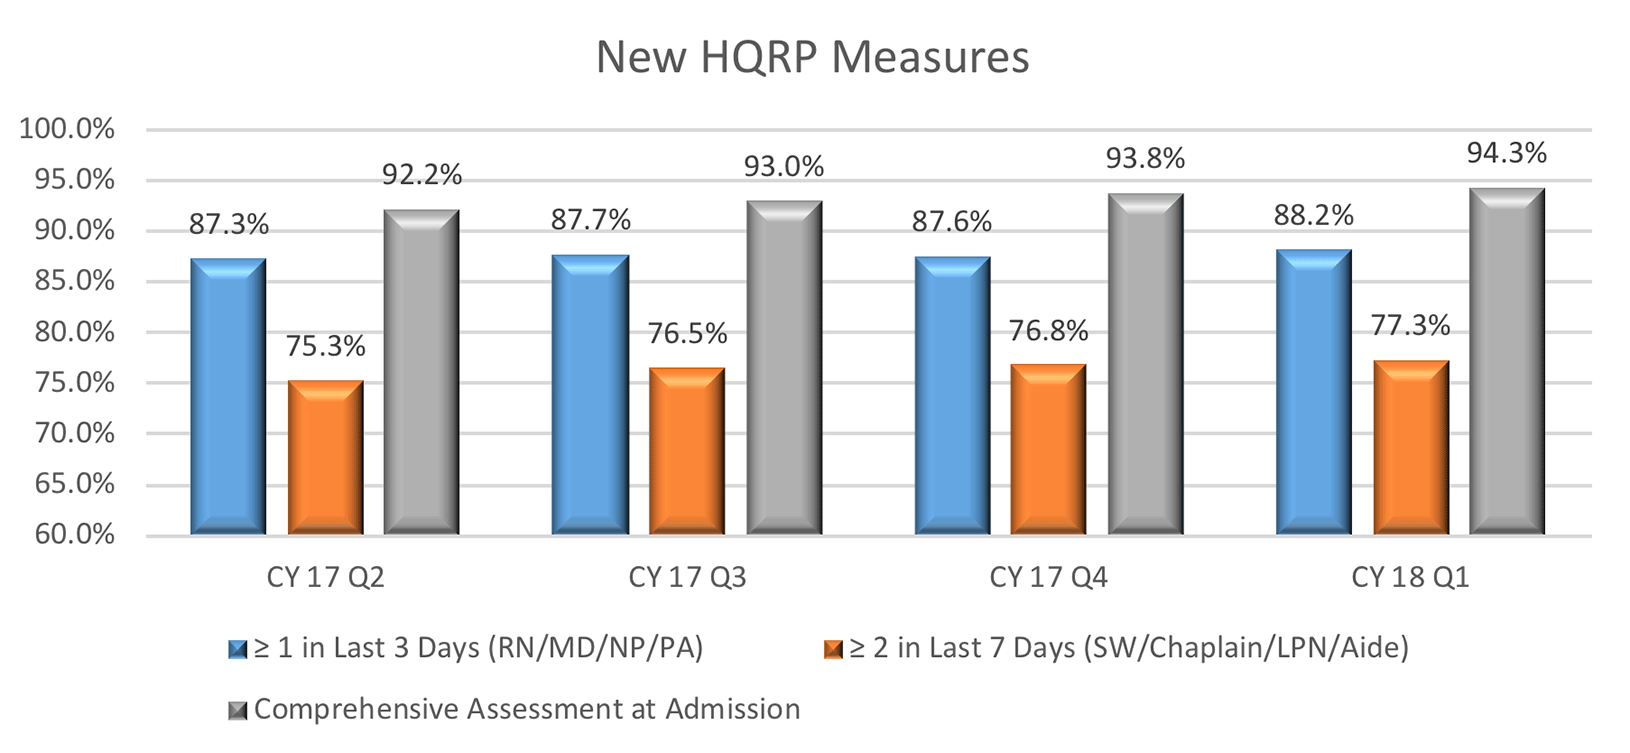 Improvement in new HQRP measures